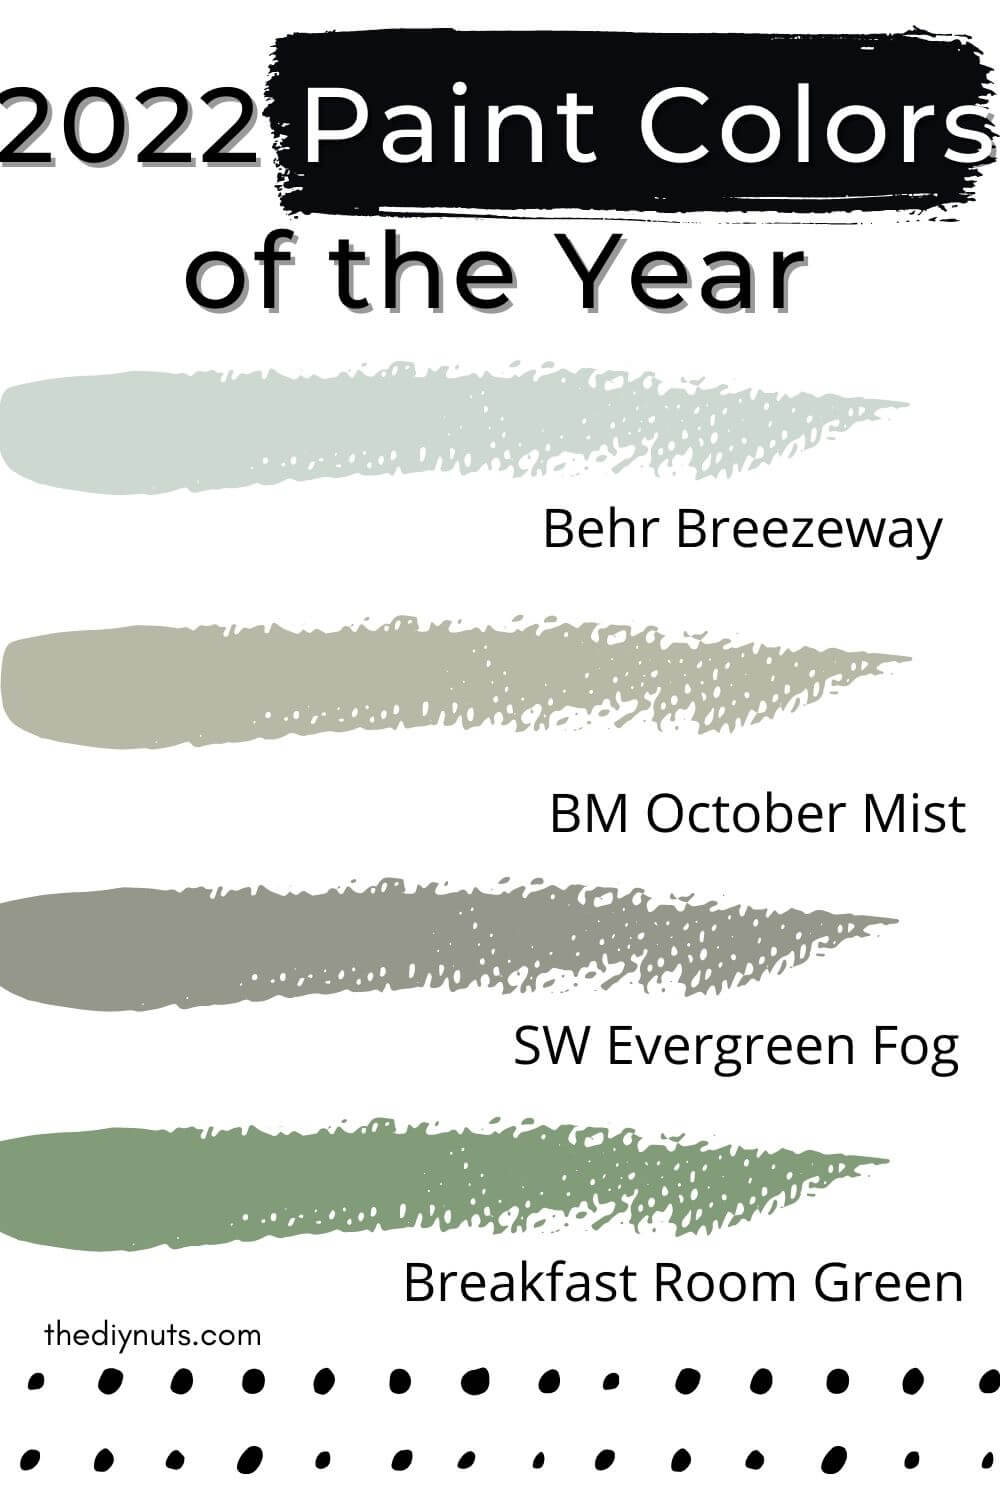 2022 paint colors of the year Behr Breezeway with paint swipe, BM October Mist, SW evergreen Fog and Breakfast room green